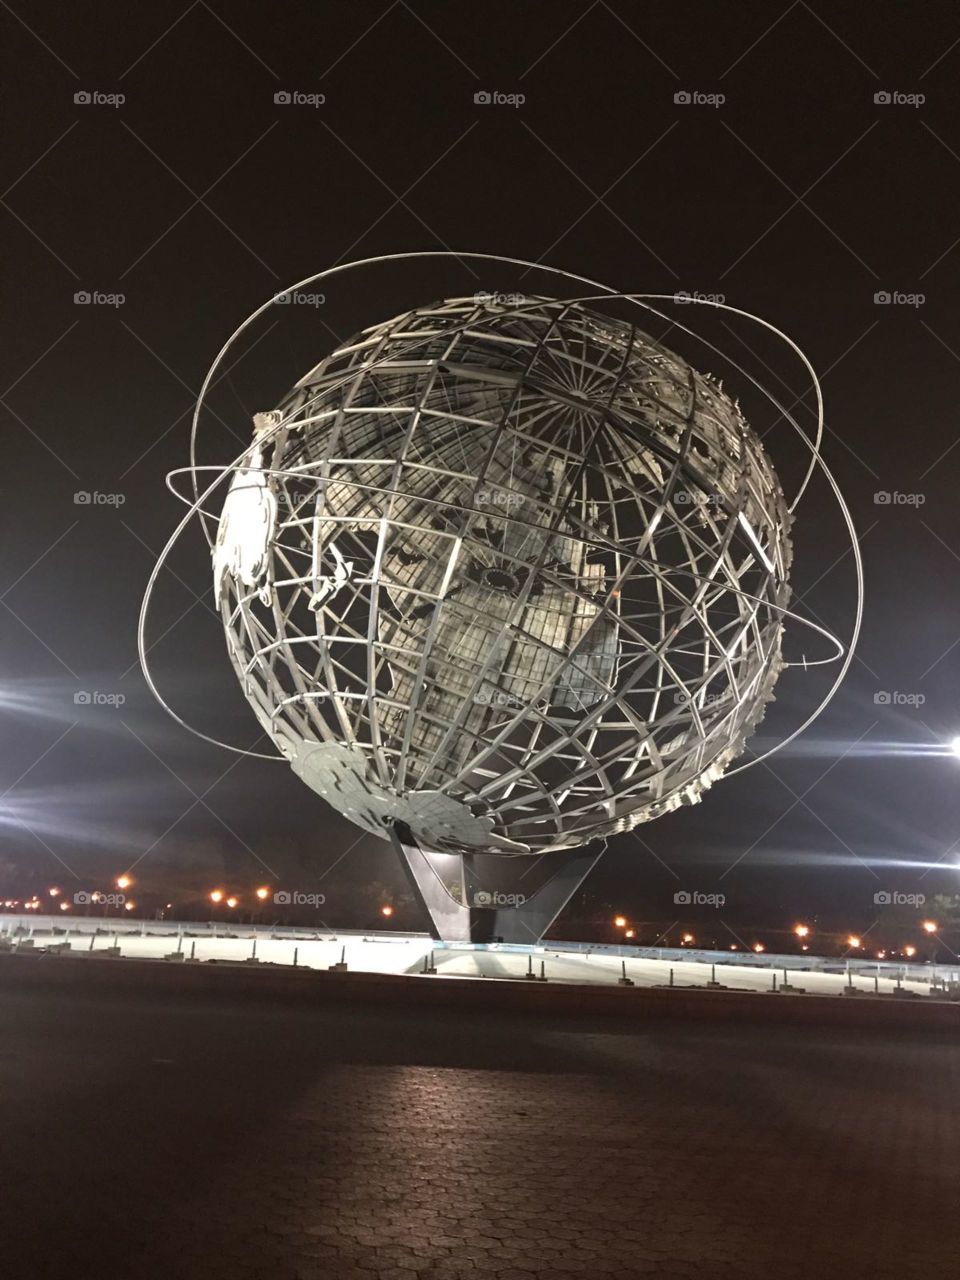 Unisphere at Flushing Meadows Corona park in Queens, New York.